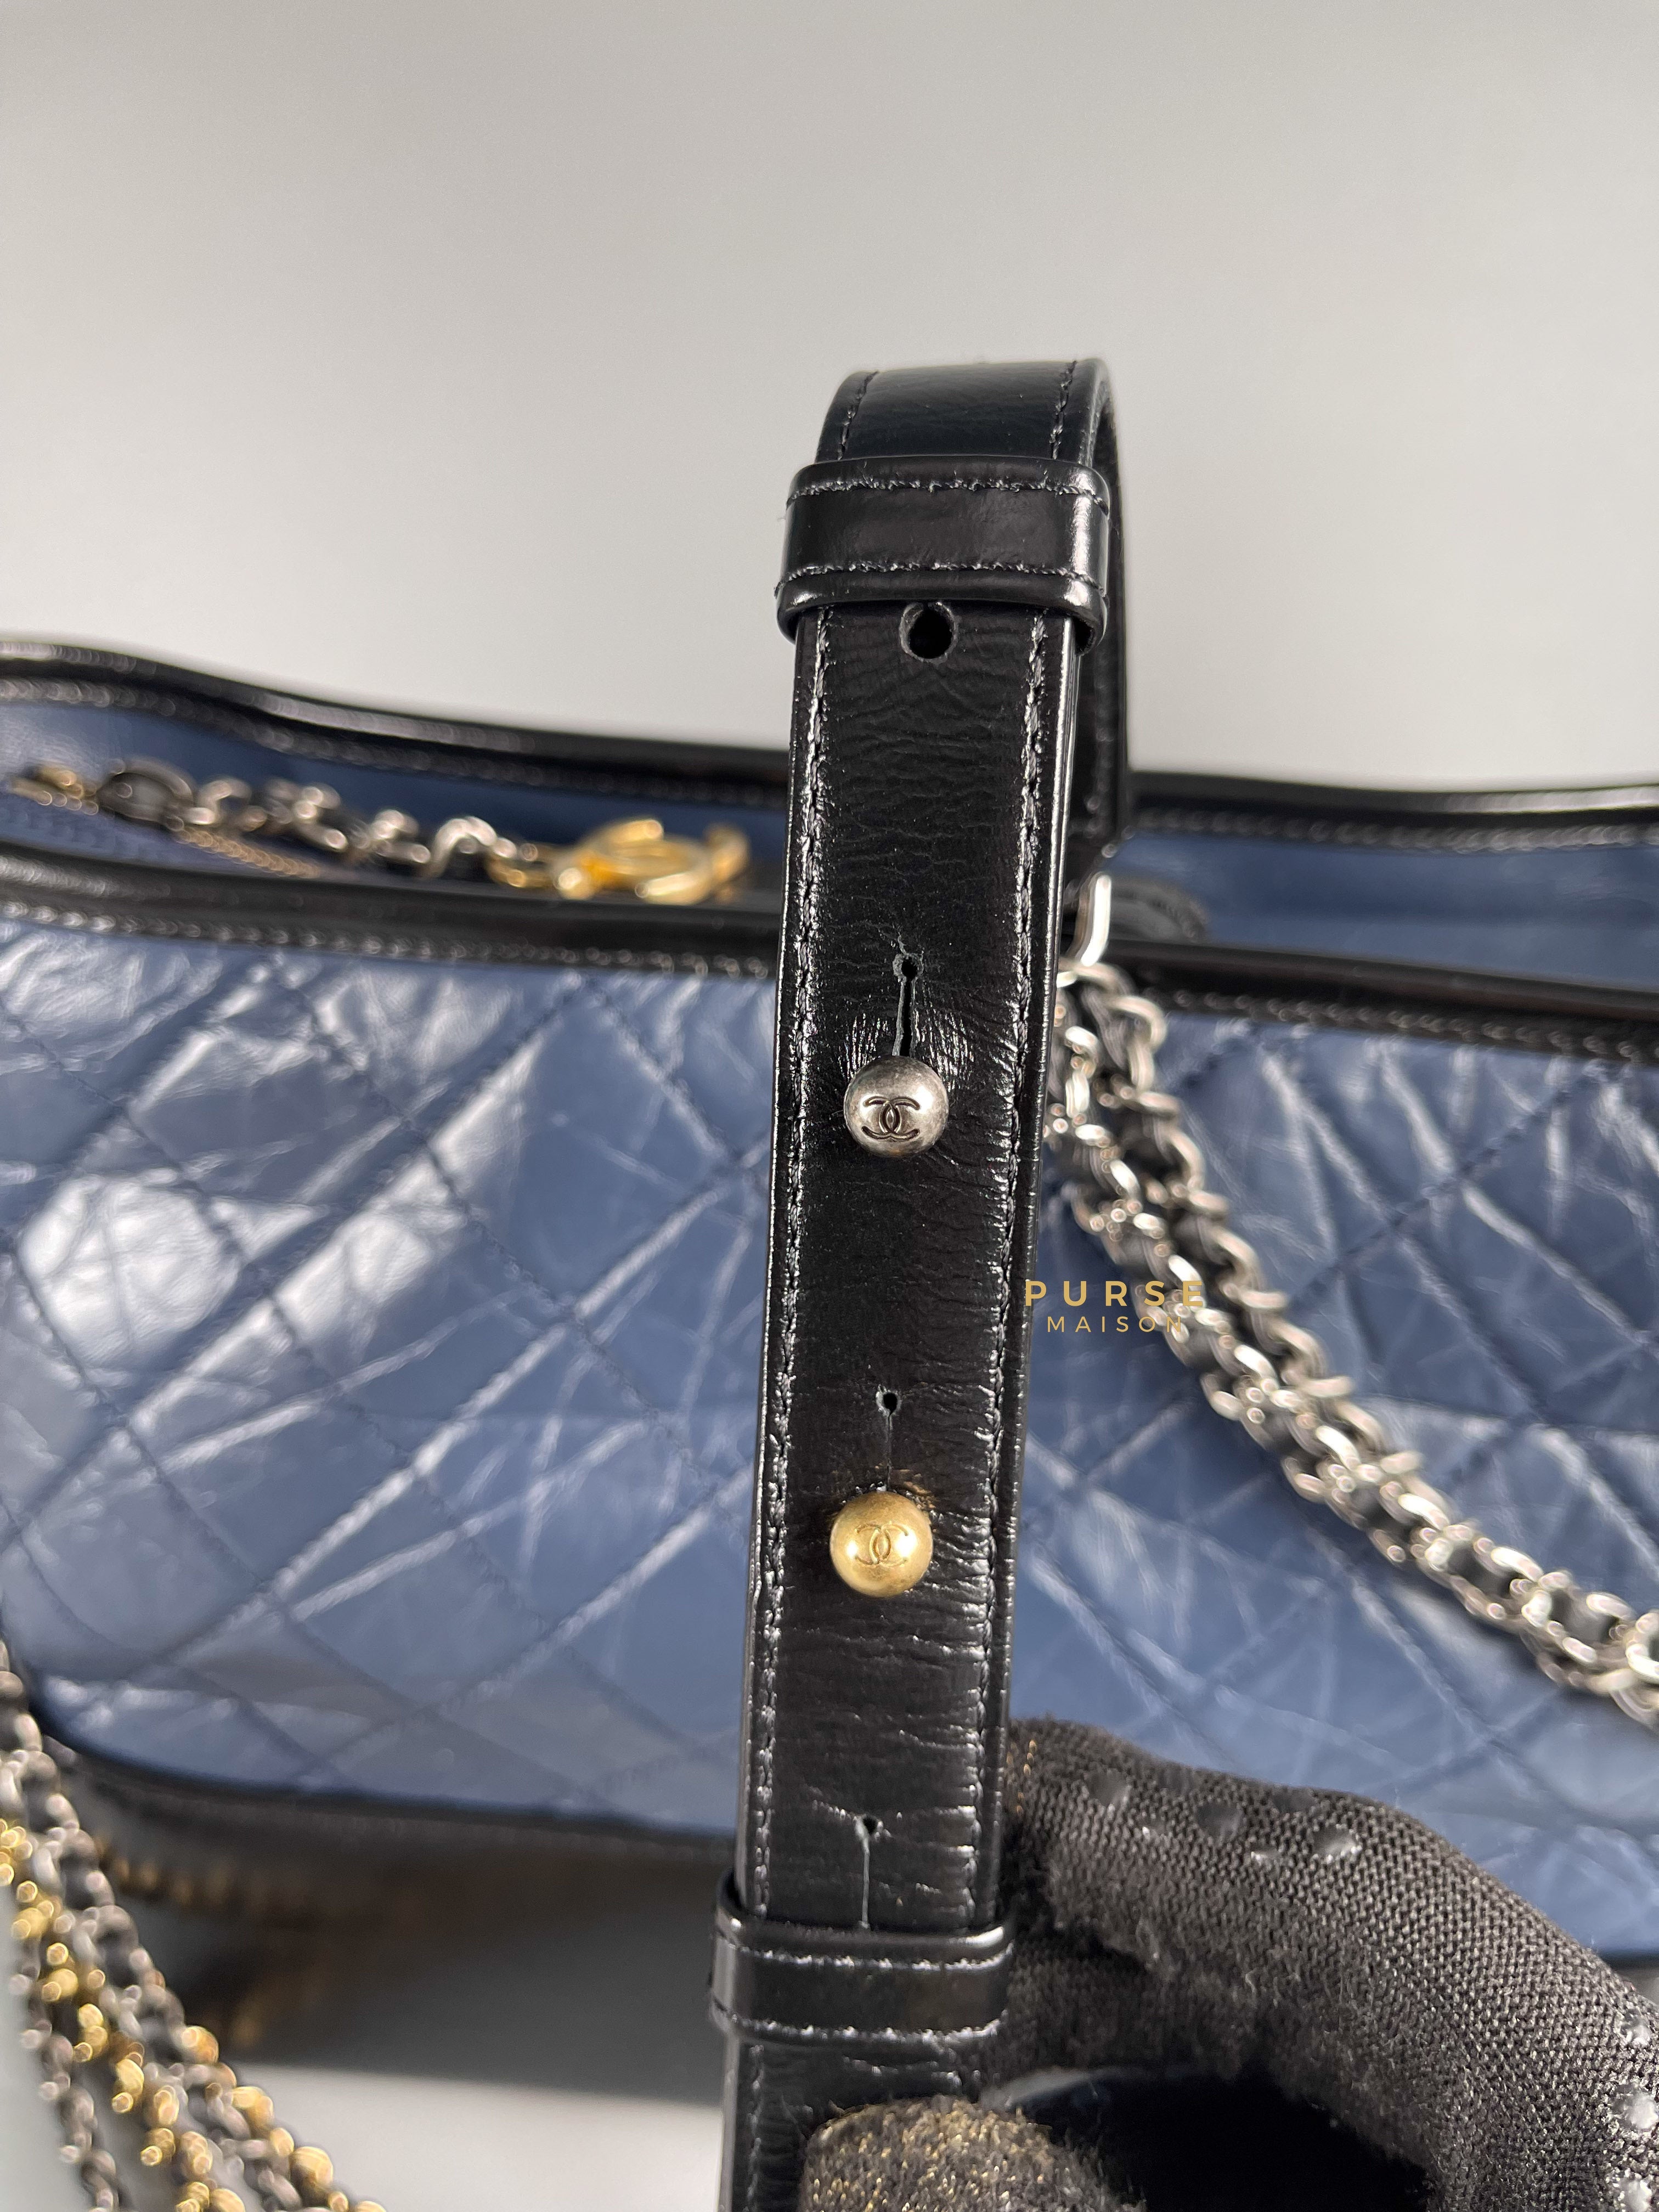 Chanel Gabrielle Old Medium Hobo Bag in Navy Blue Distressed Calfskin Leather & Mixed Hardware (Series 27) | Purse Maison Luxury Bags Shop